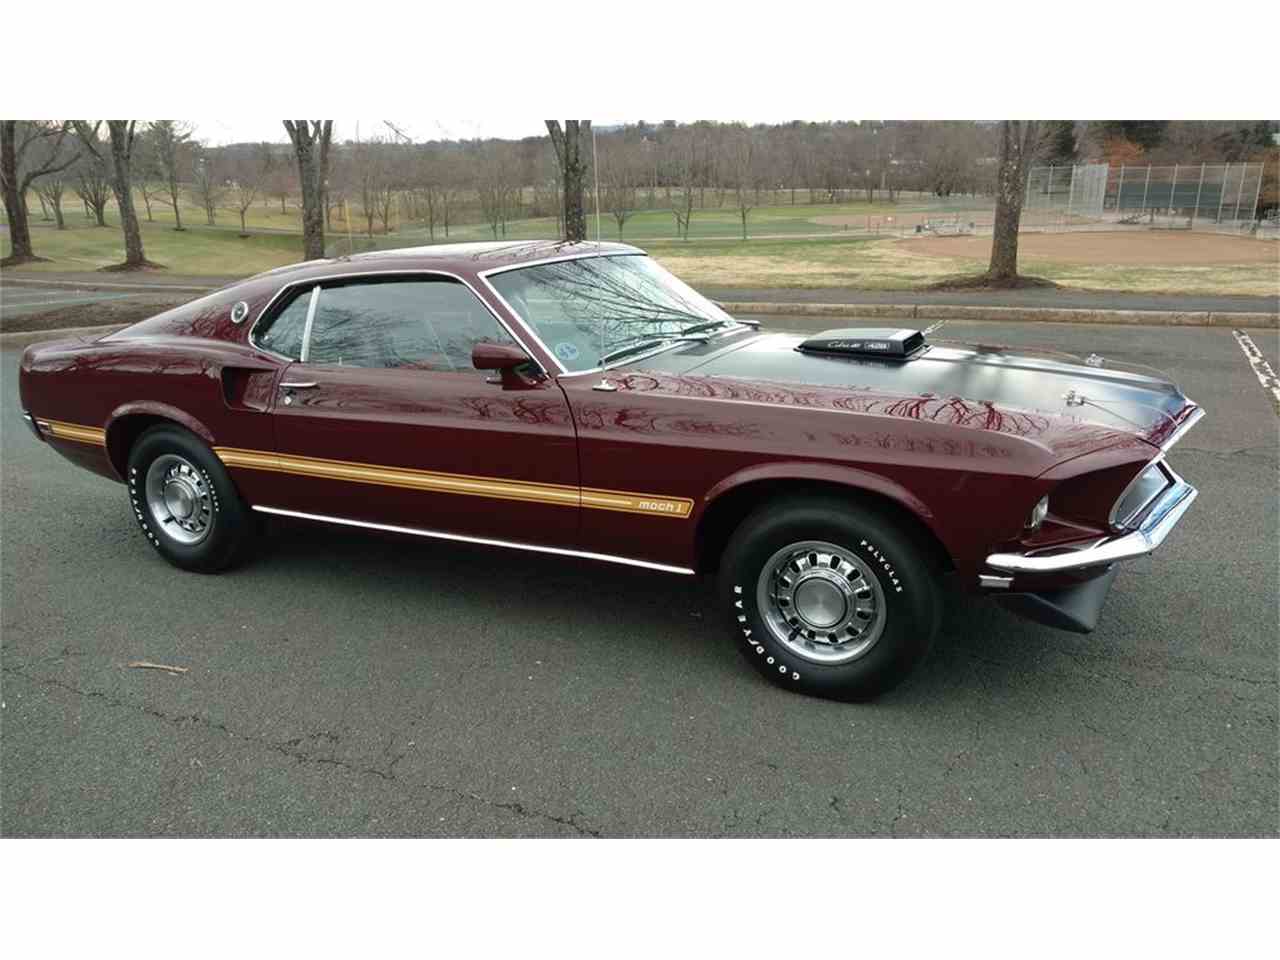 Nice wallpapers Ford Mustang Mach I 1280x960px